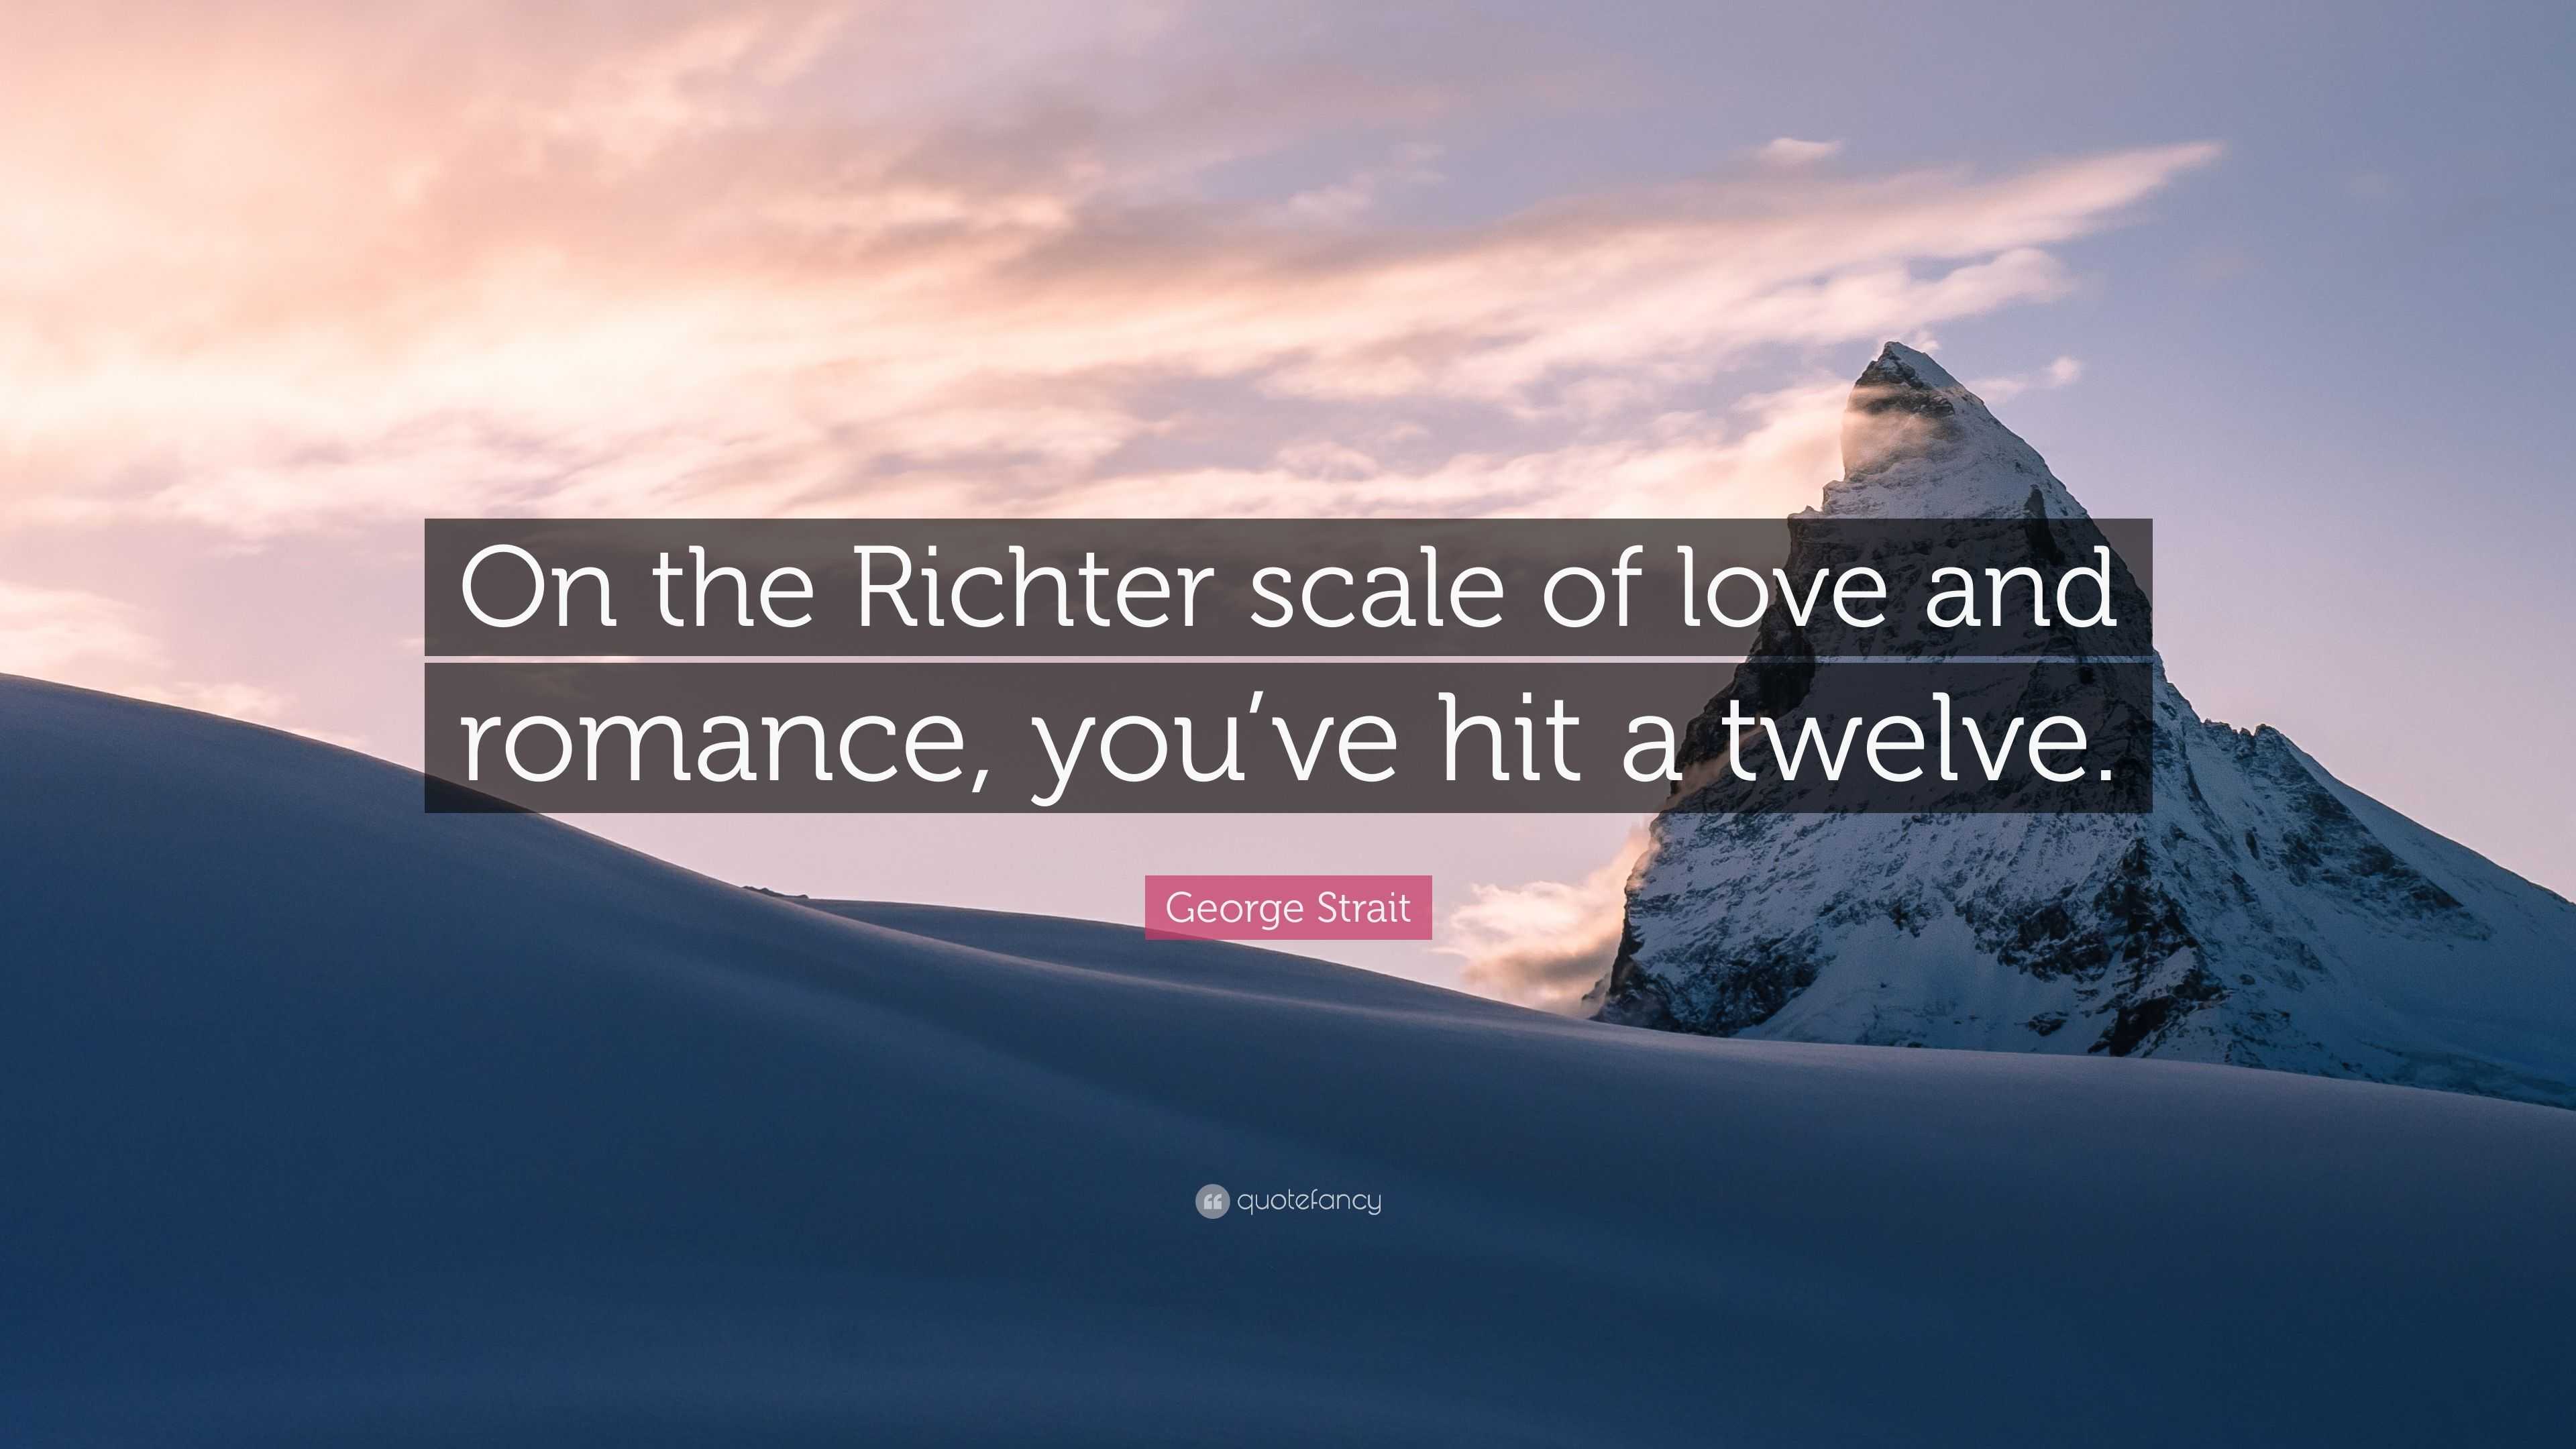 George Strait Quote: “On the Richter scale of love and romance, you've hit a  twelve.”